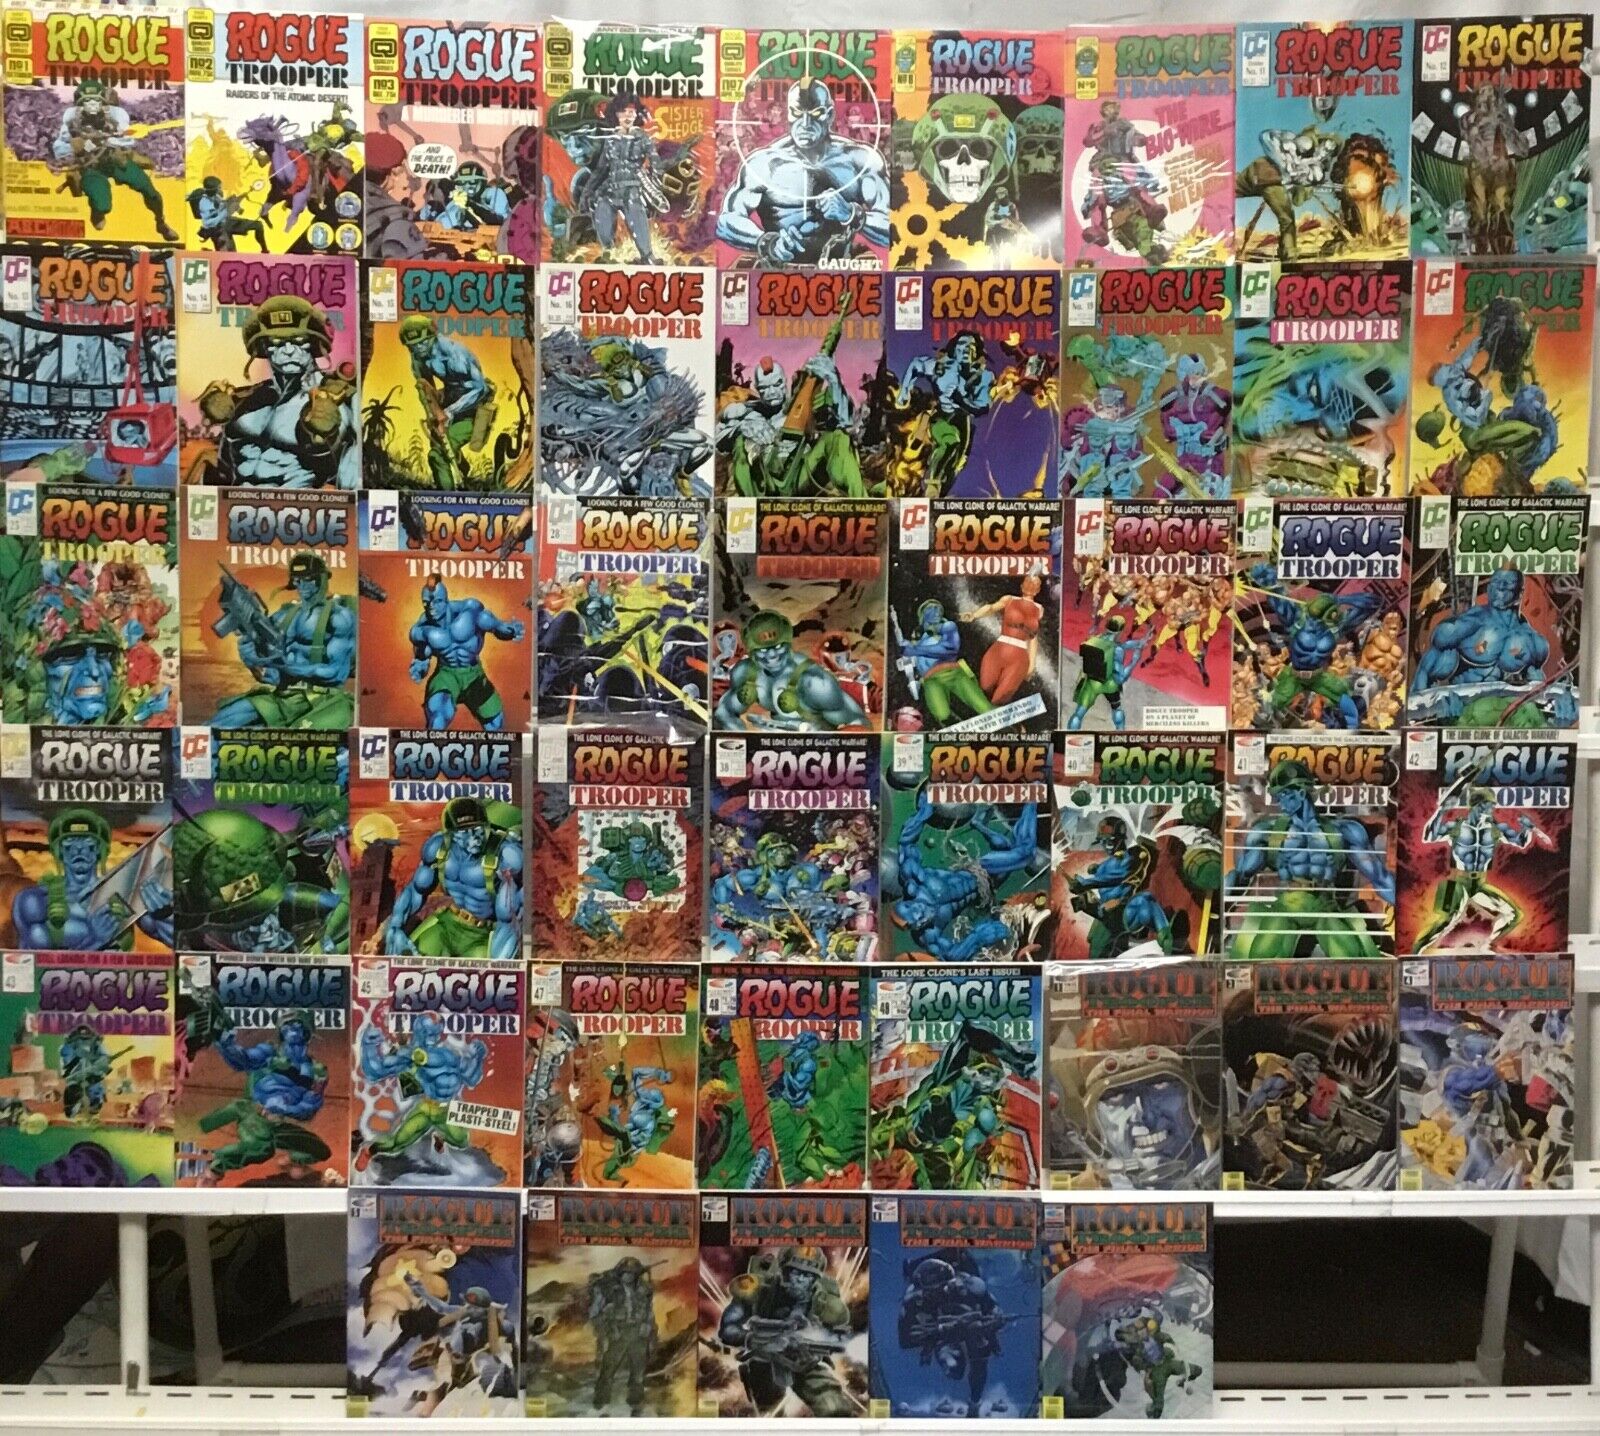 Quality Comics Rogue Trooper Sets - Read Description For More Info and Missing